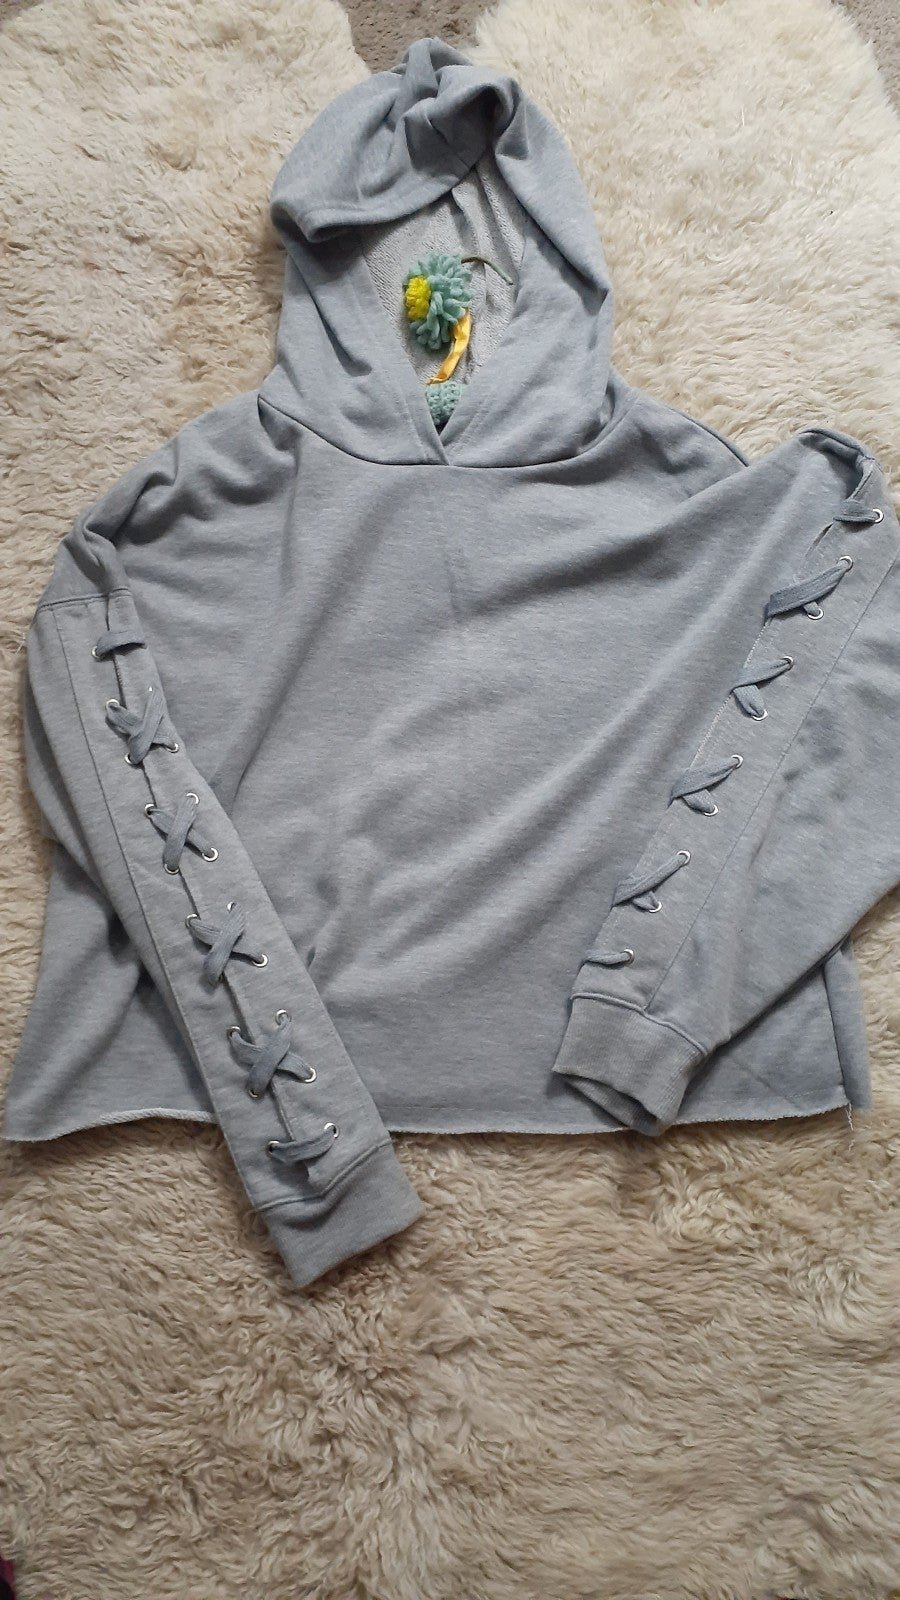 save up to 70% Rue21 Cropped Hoodie 2XL 2X XXL Criss Cross Cut Out Lace Up Long Sleeves Y2K pMi14wrmU Discount